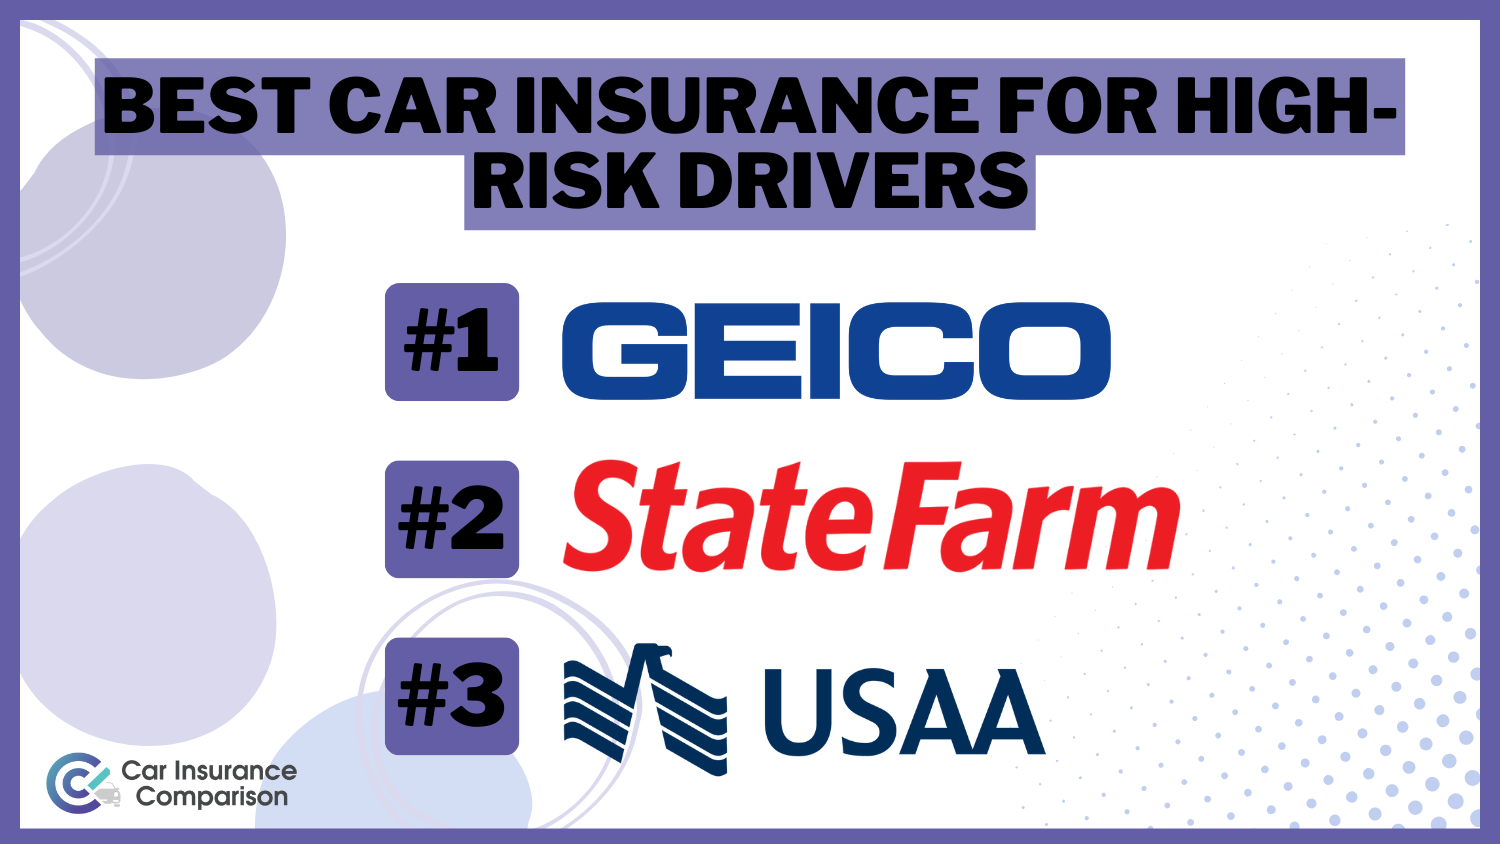 best car insurance for high-risk drivers: Geico, State Farm, USAA